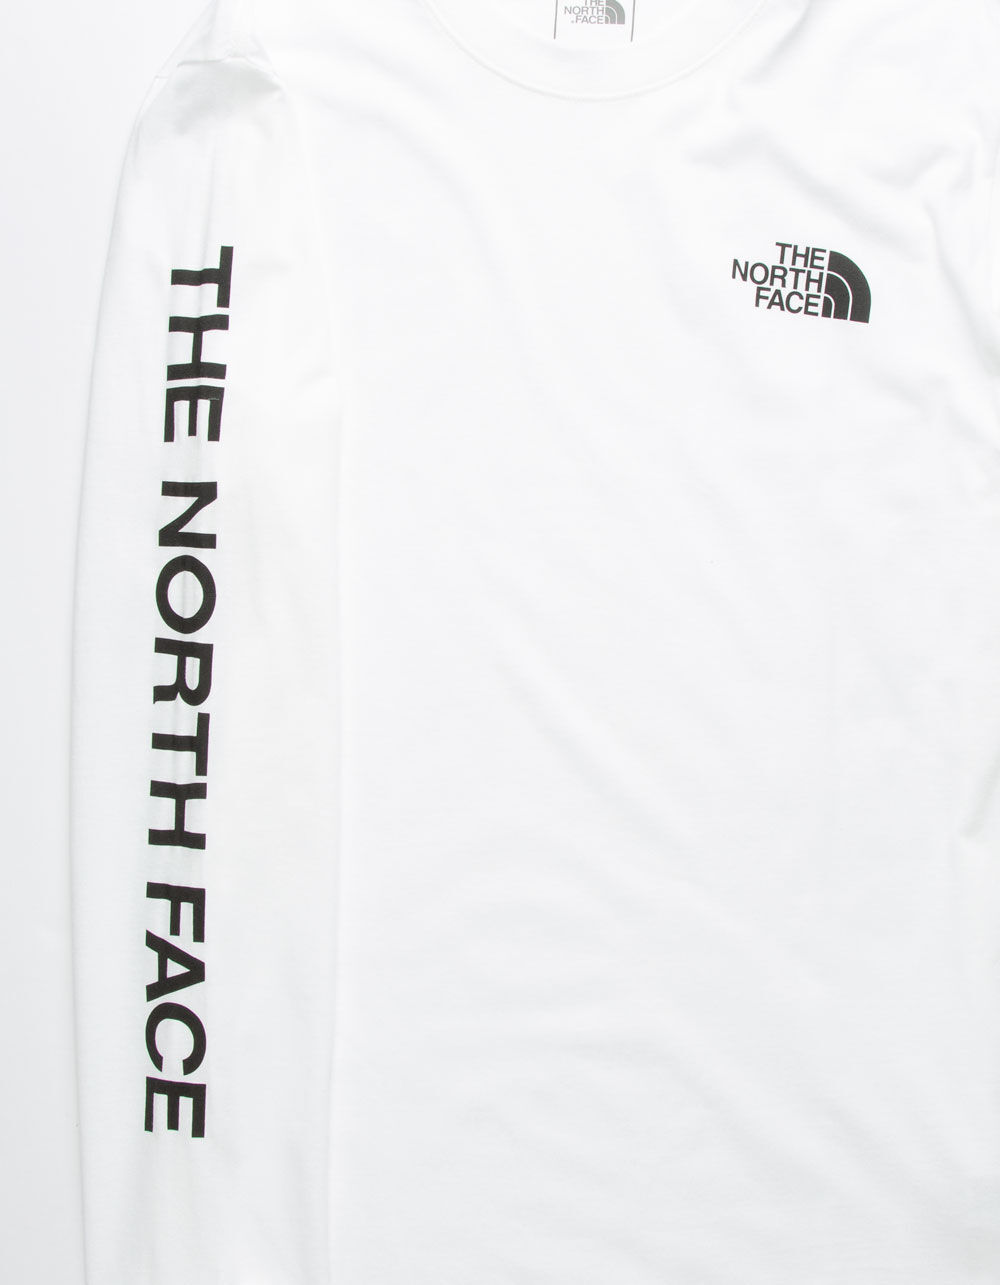 THE NORTH FACE Brand Proud Mens T-Shirt - WHITE | Tillys